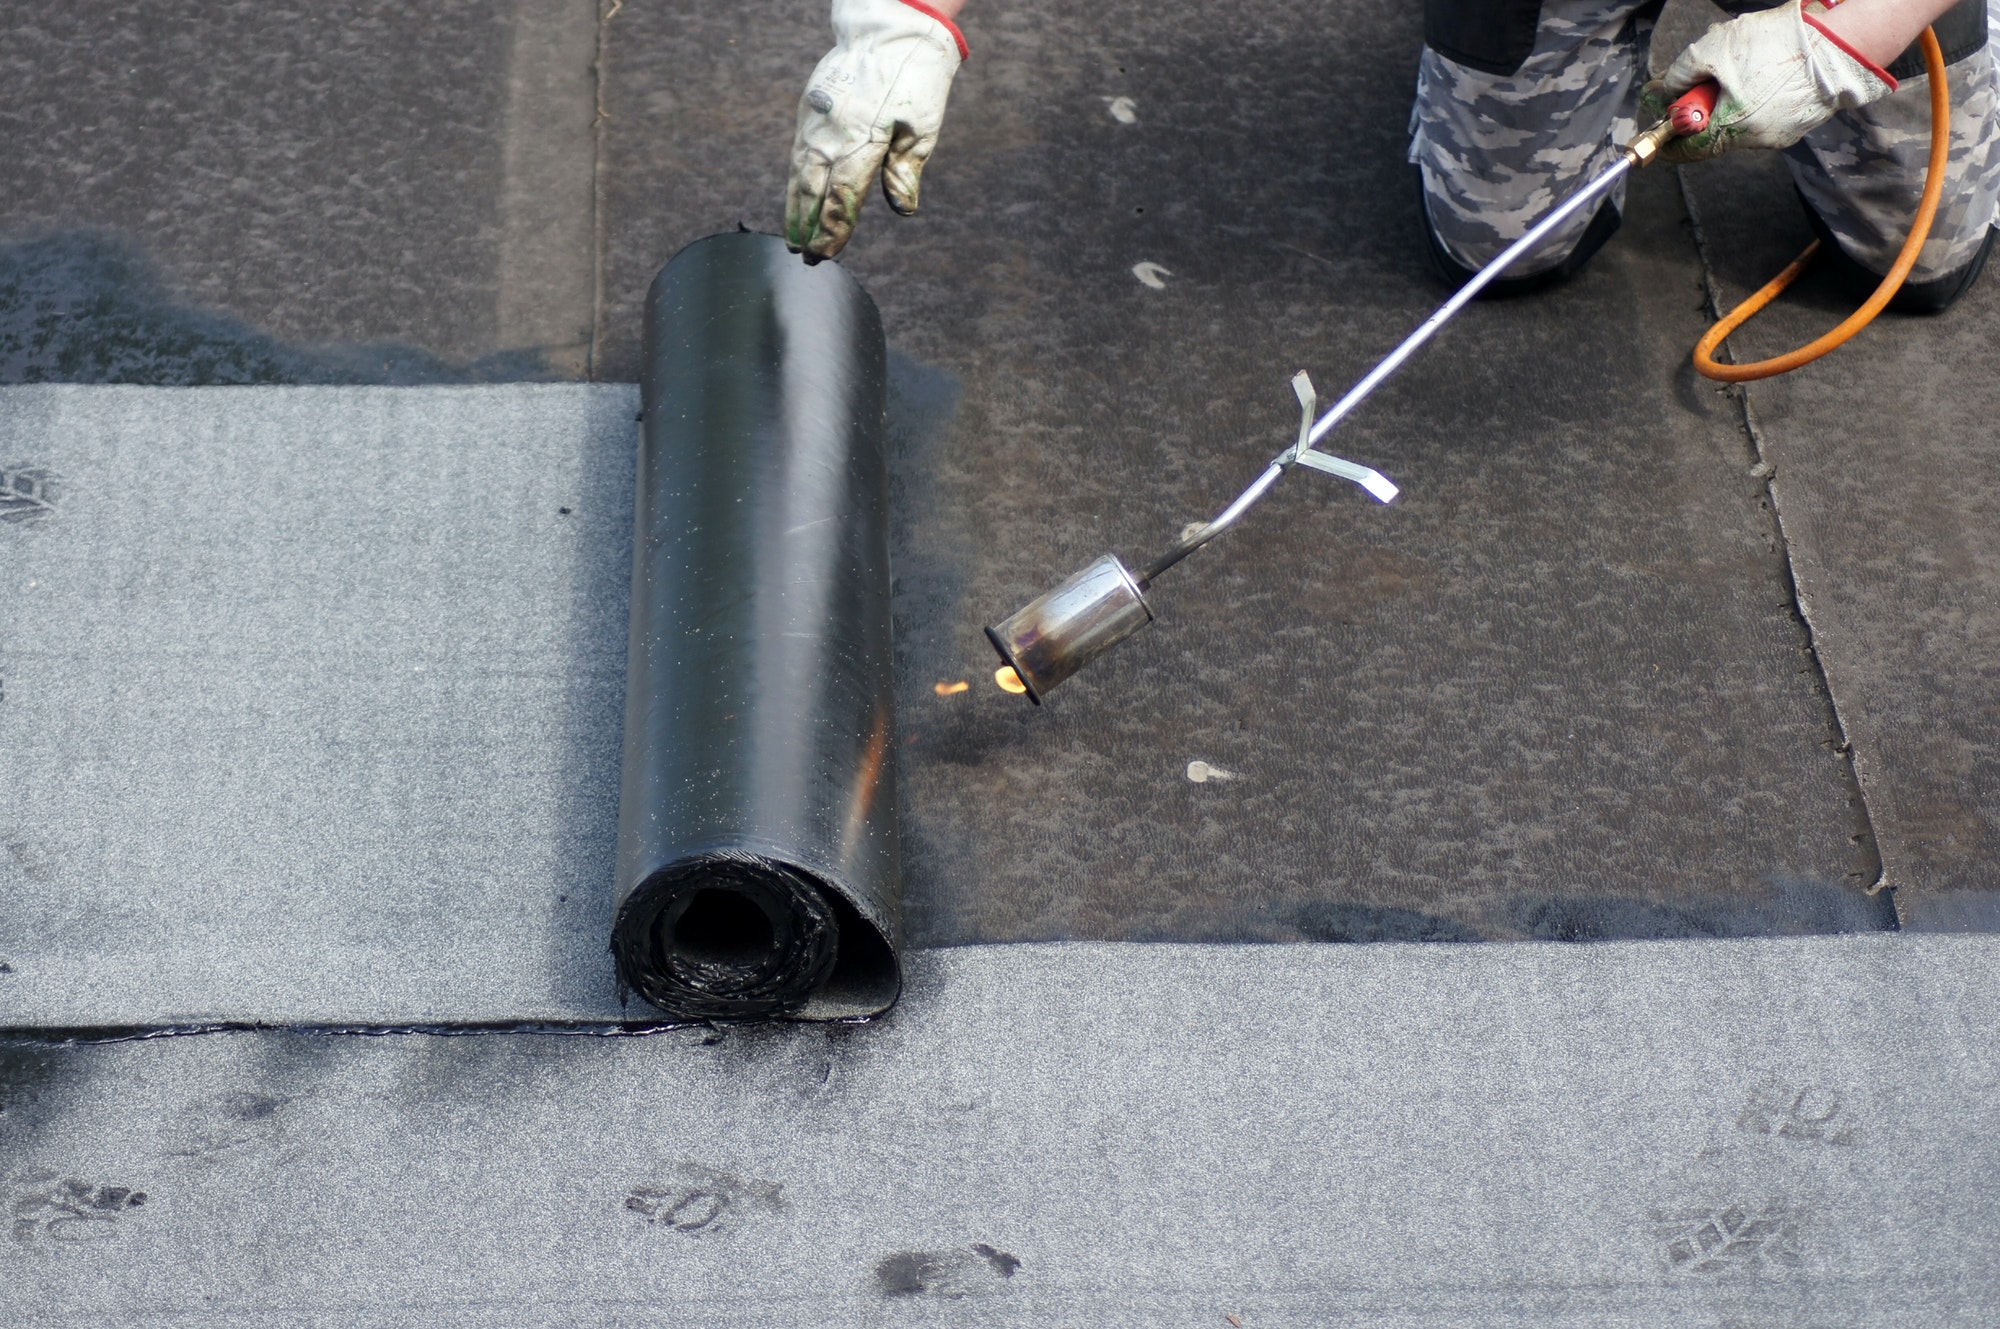 Flat roof installation with propane blowtorch during construction works with roofing felt